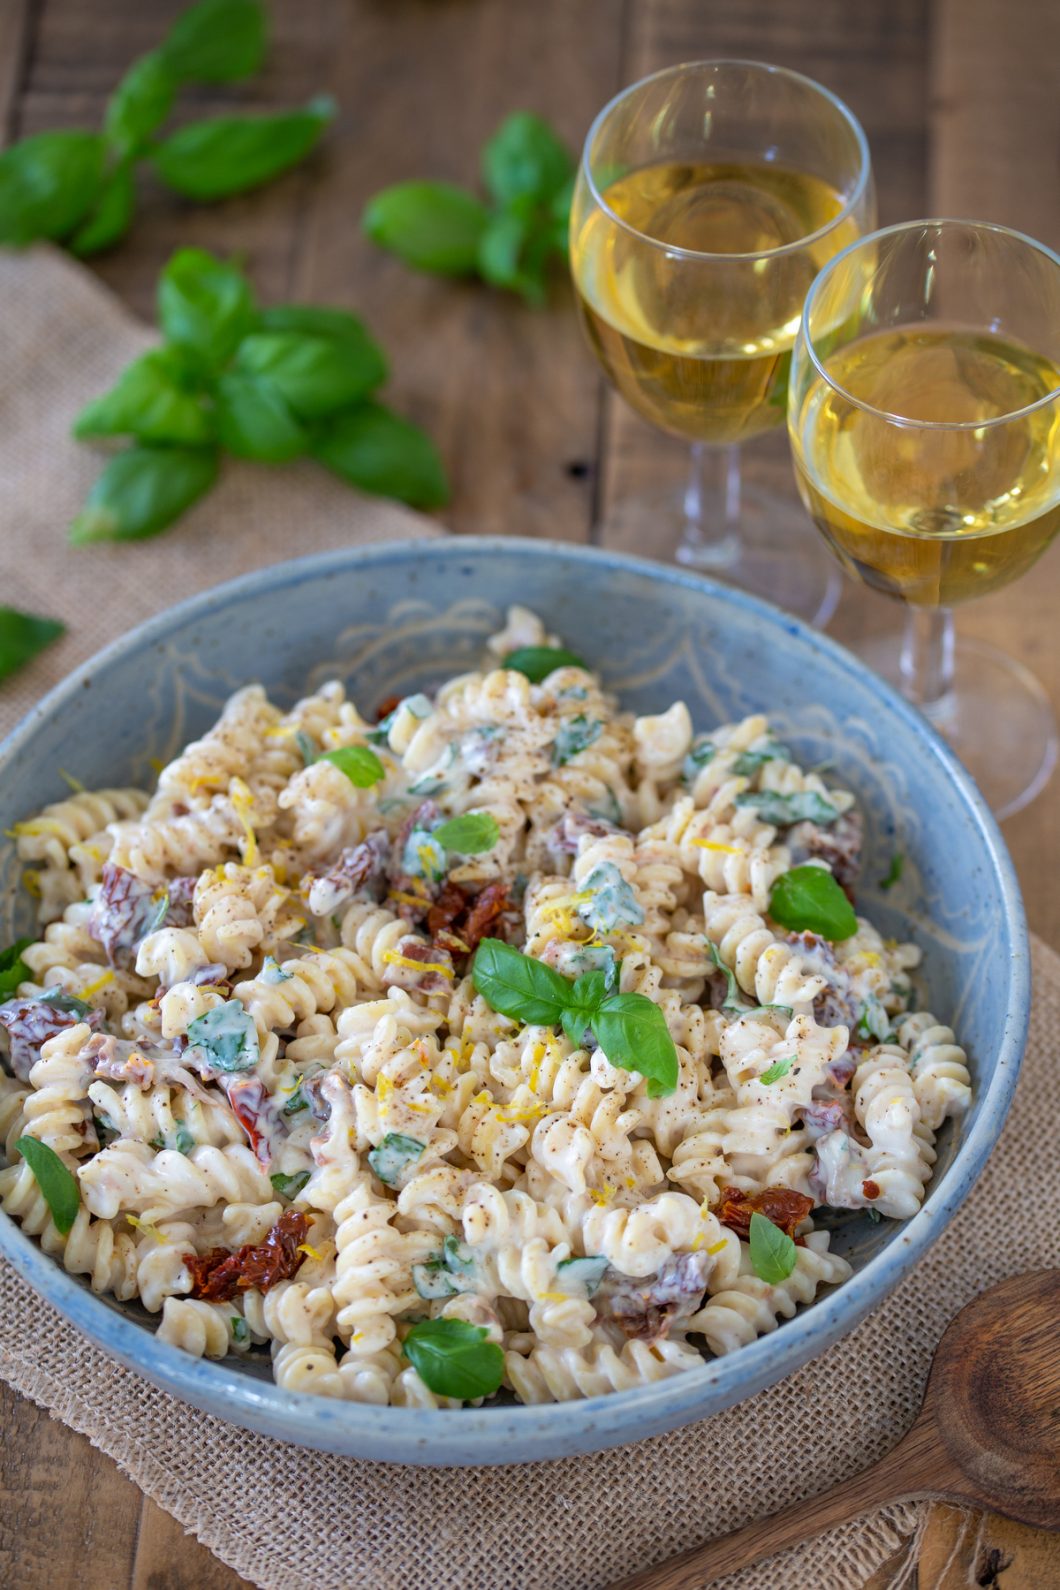 This creamy ricotta pasta salad in a serving bowl.